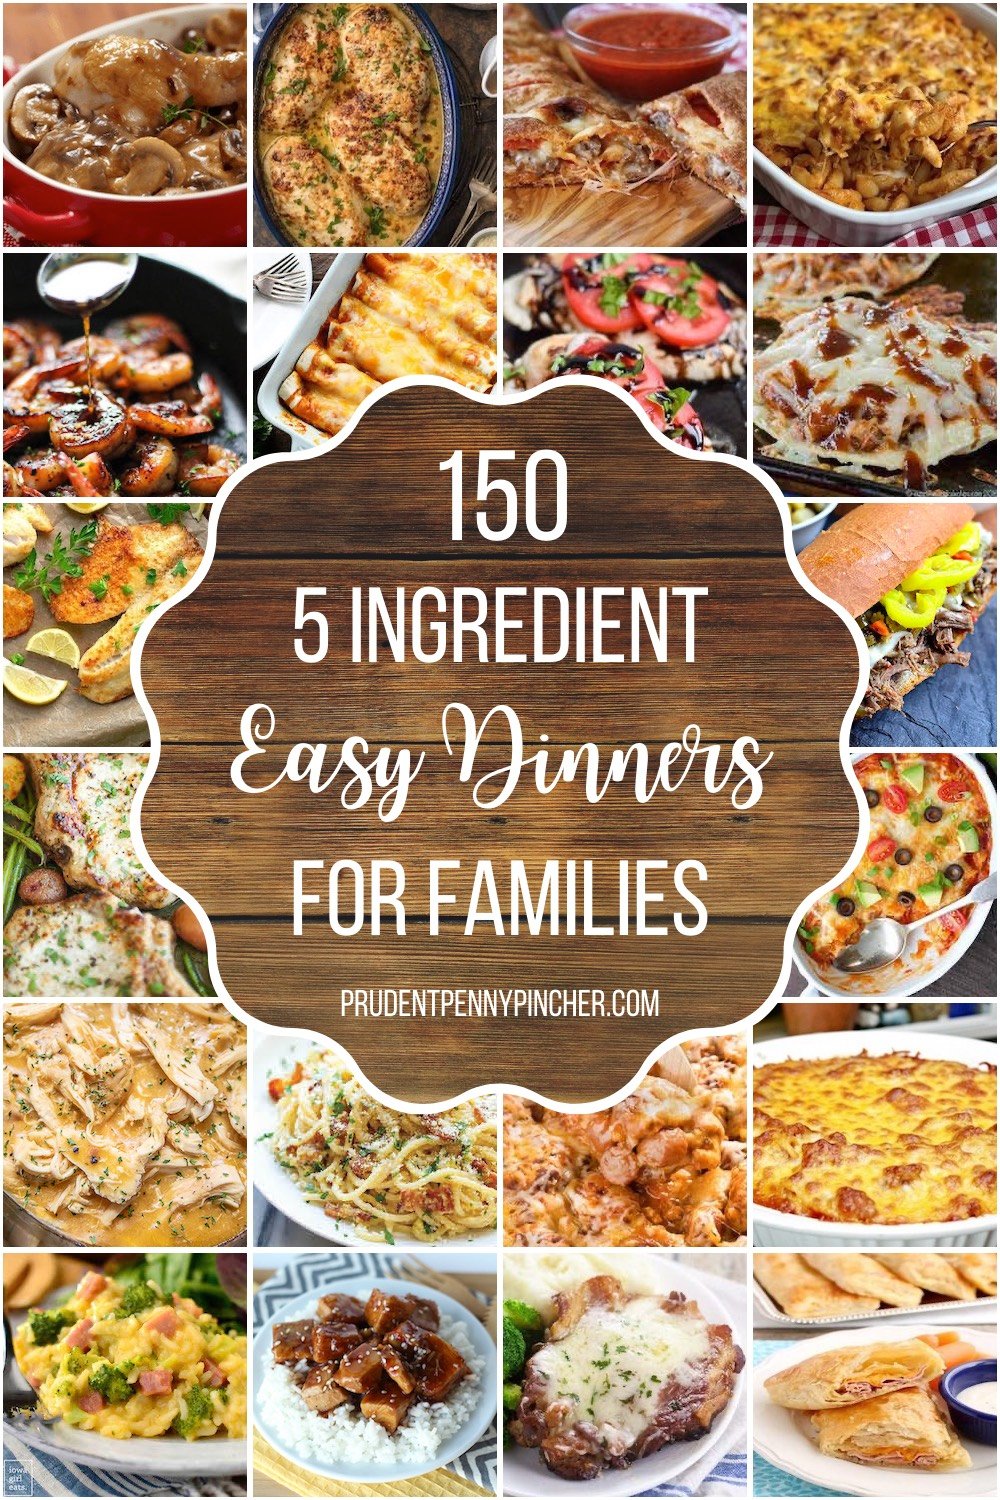 5 Ingredient Easy Dinner Recipes for Families